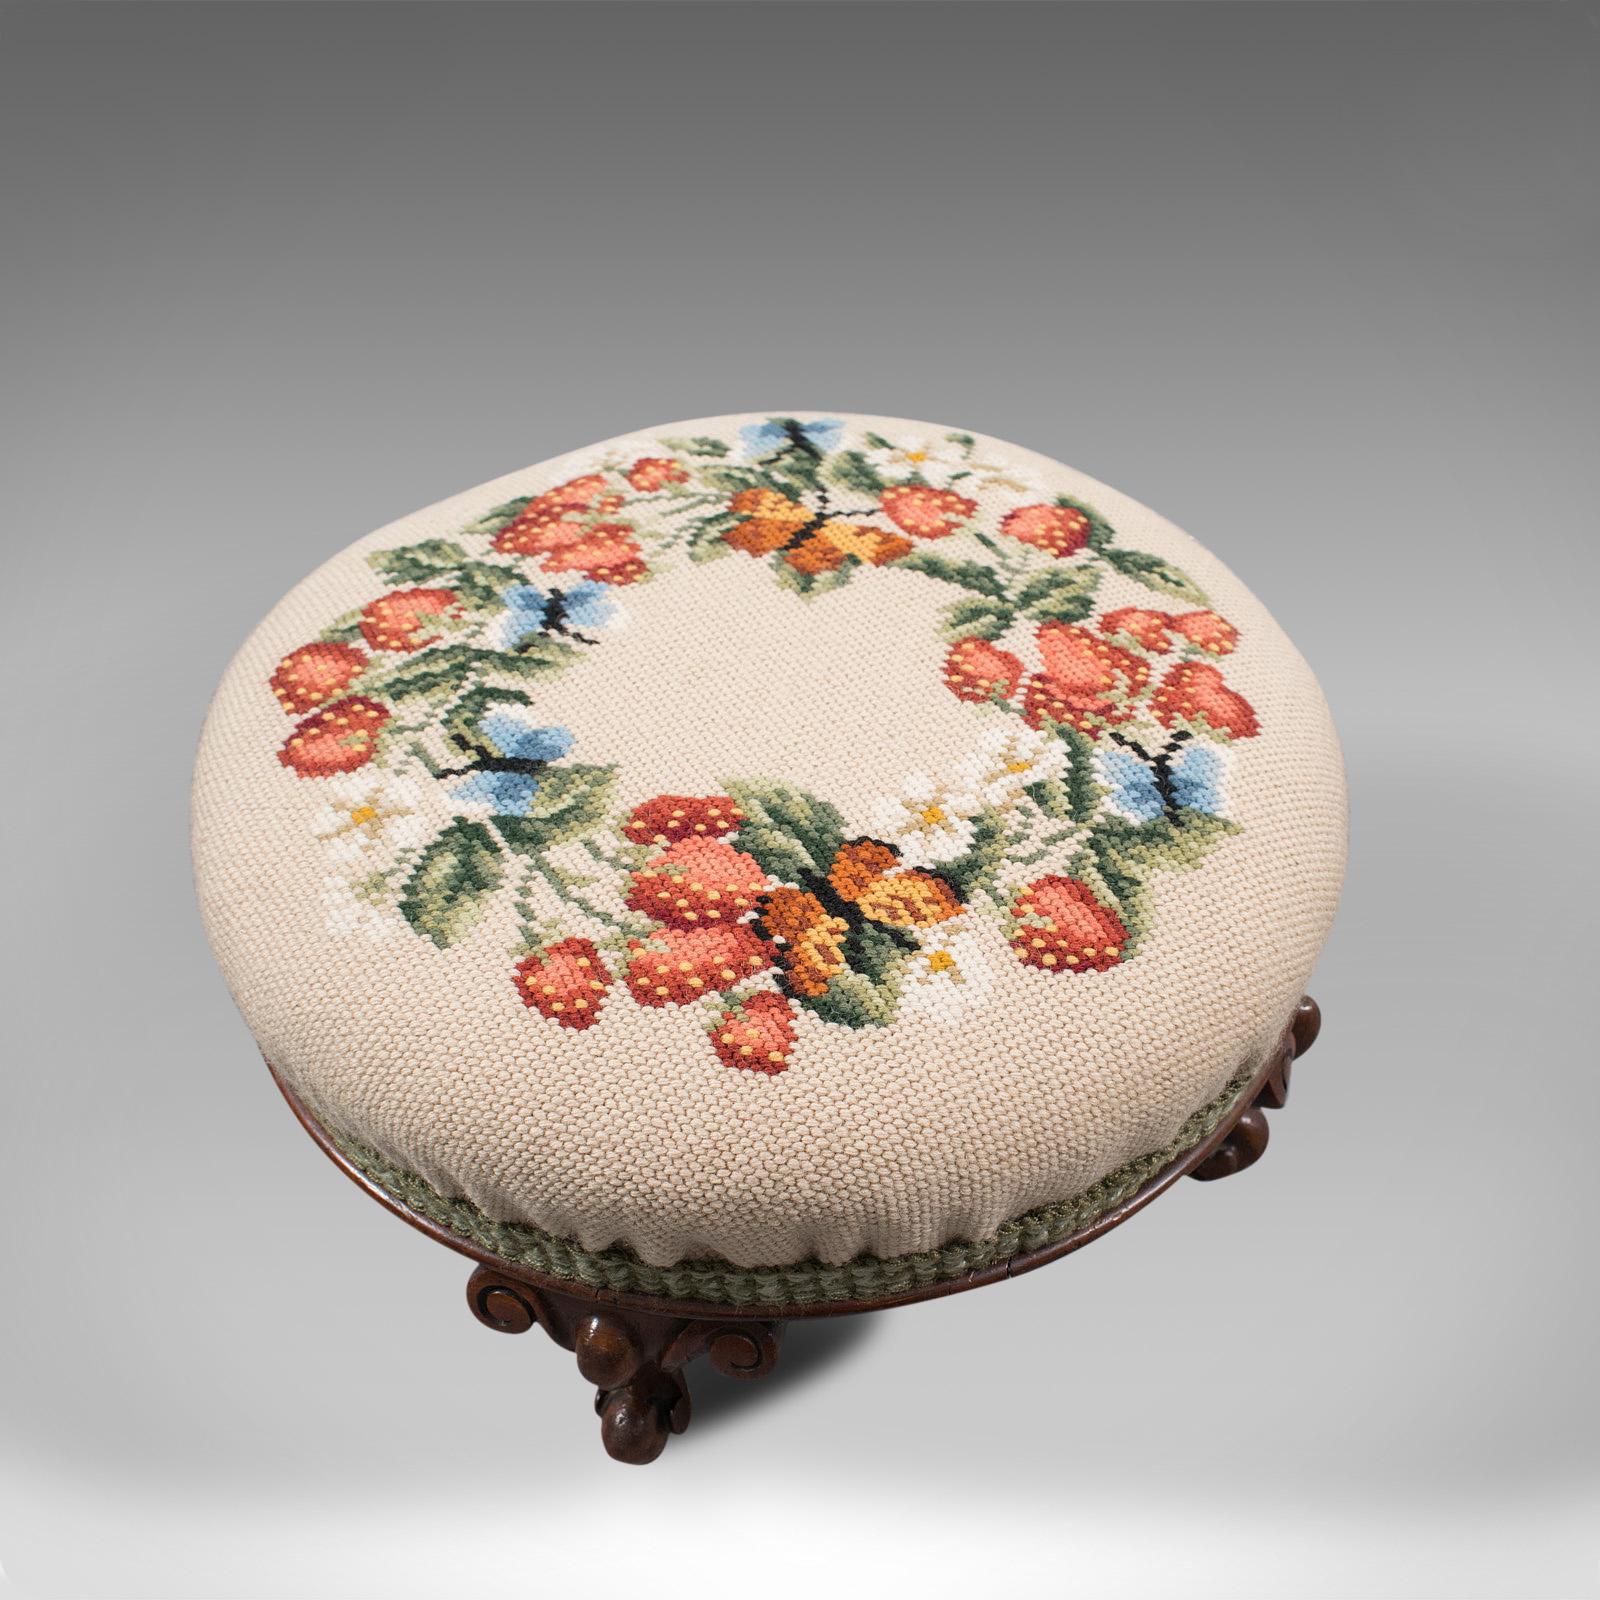 British Small Antique Footstool, English, Walnut, Needlepoint Tapestry, Early Victorian